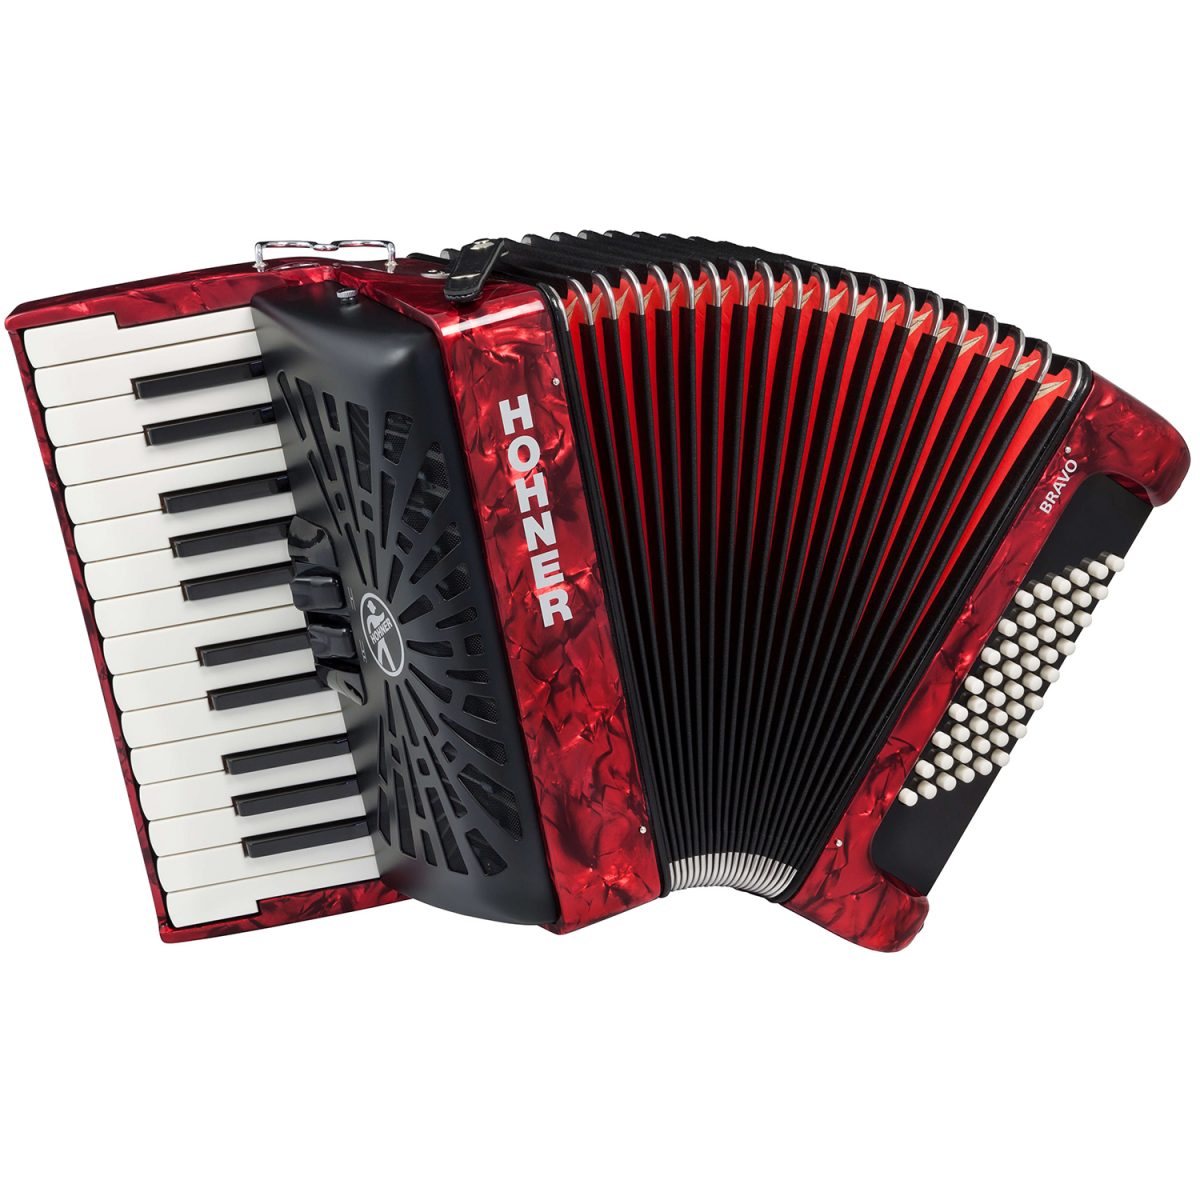 Hohner Bravo II 48 Front (Red Color)